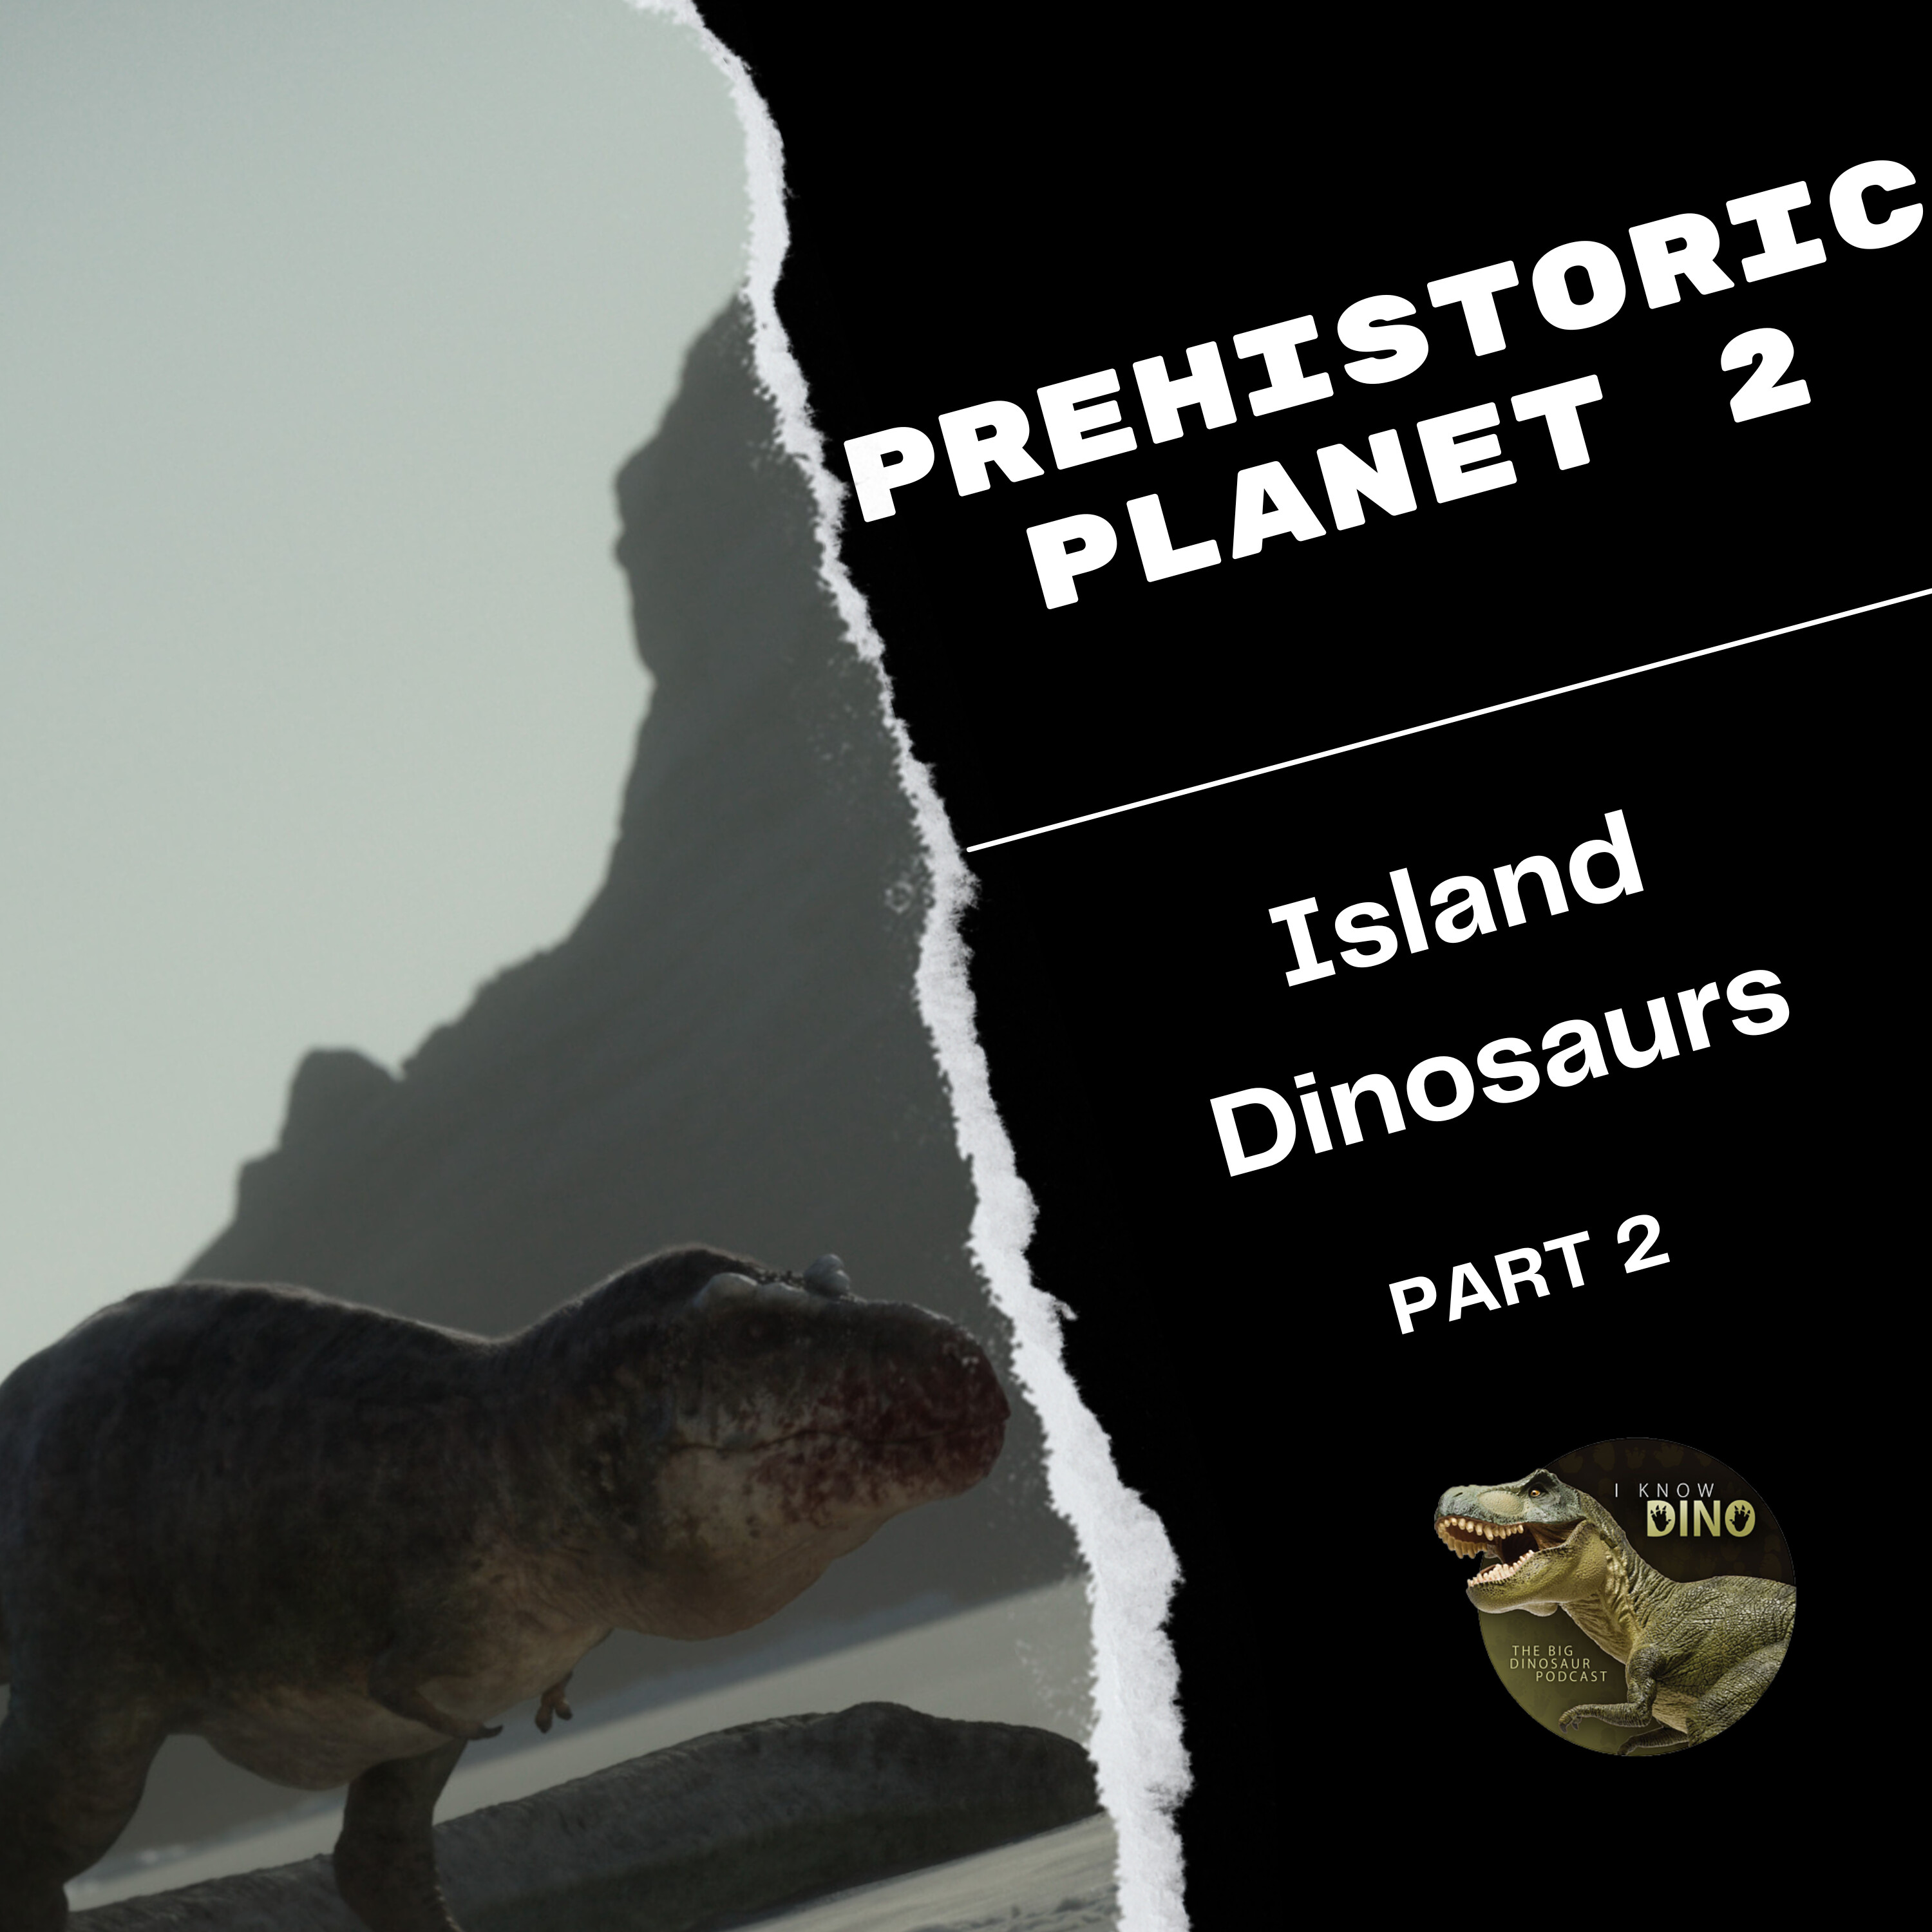 Dinosaurs on Islands: Featuring Prehistoric Planet 2